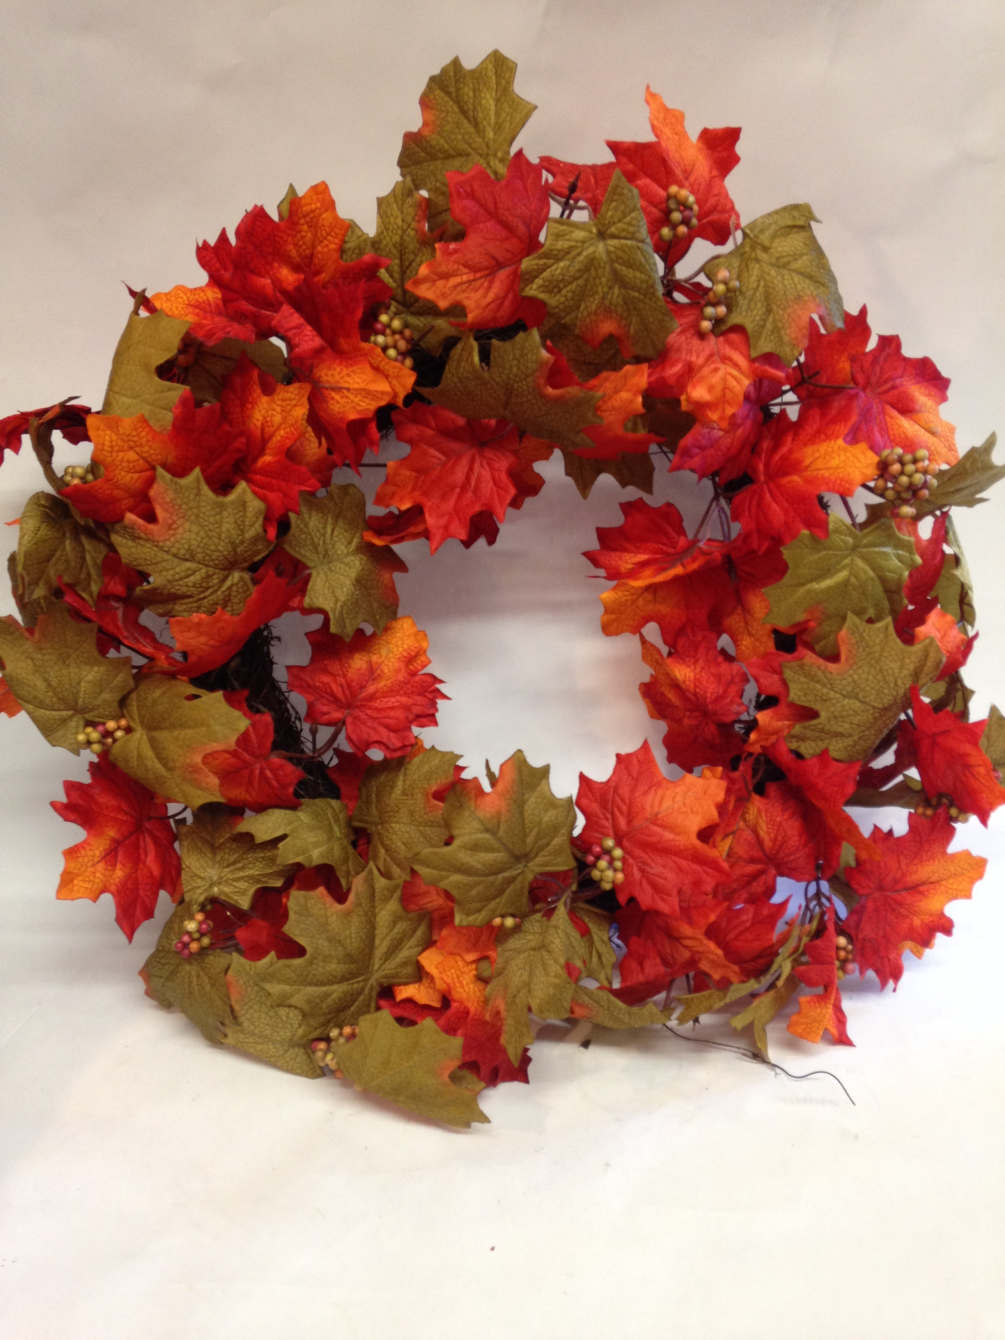 This bright autumnal wreath is perfect for any door or space to